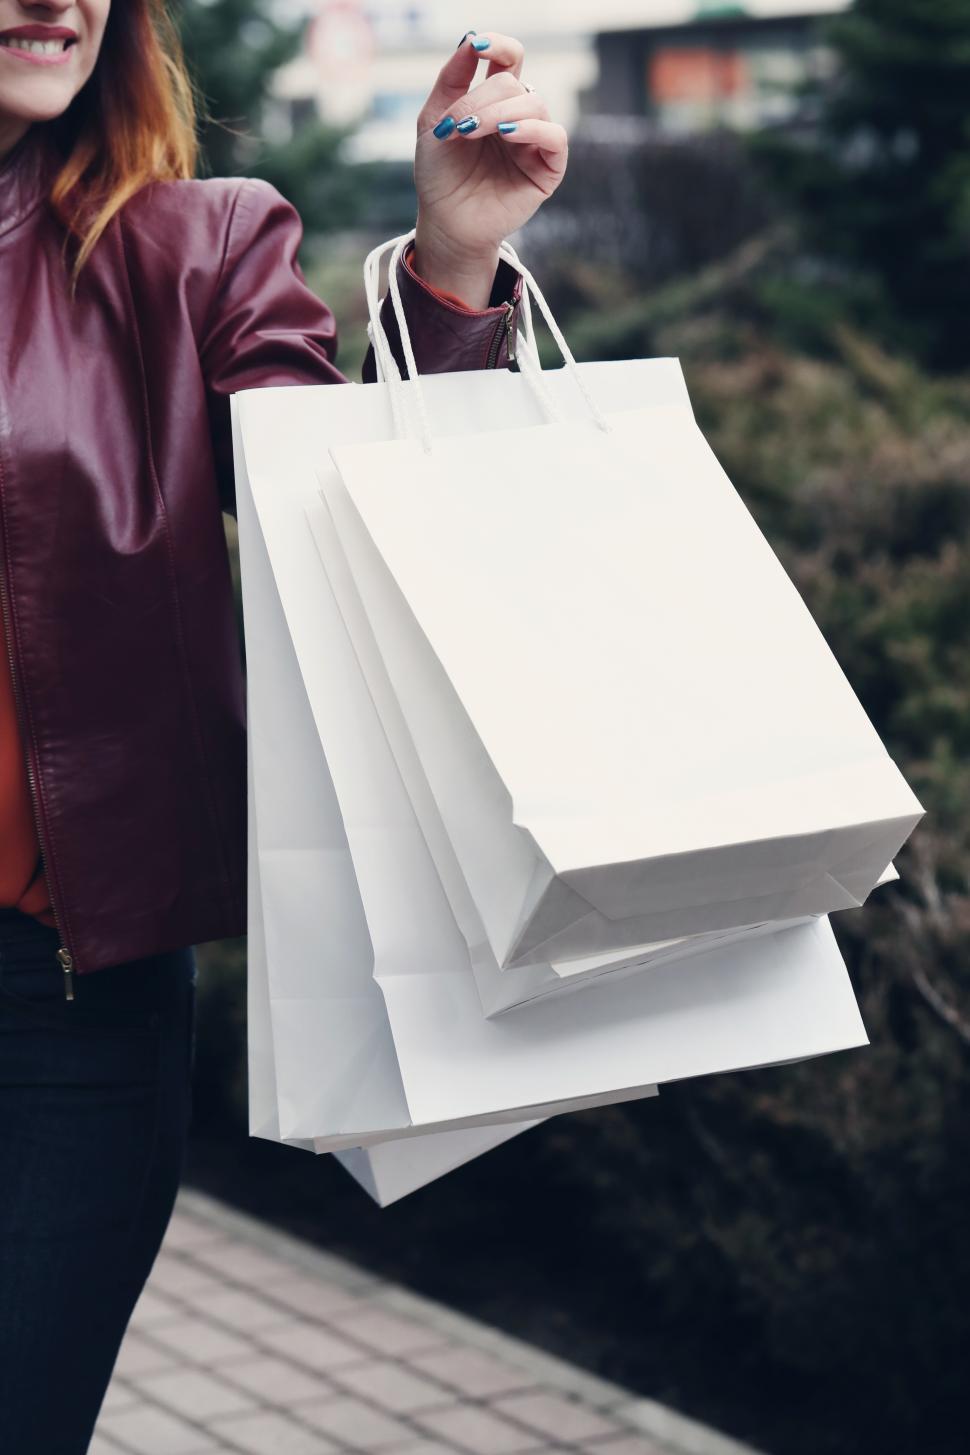 Free Image of Shopping bags 